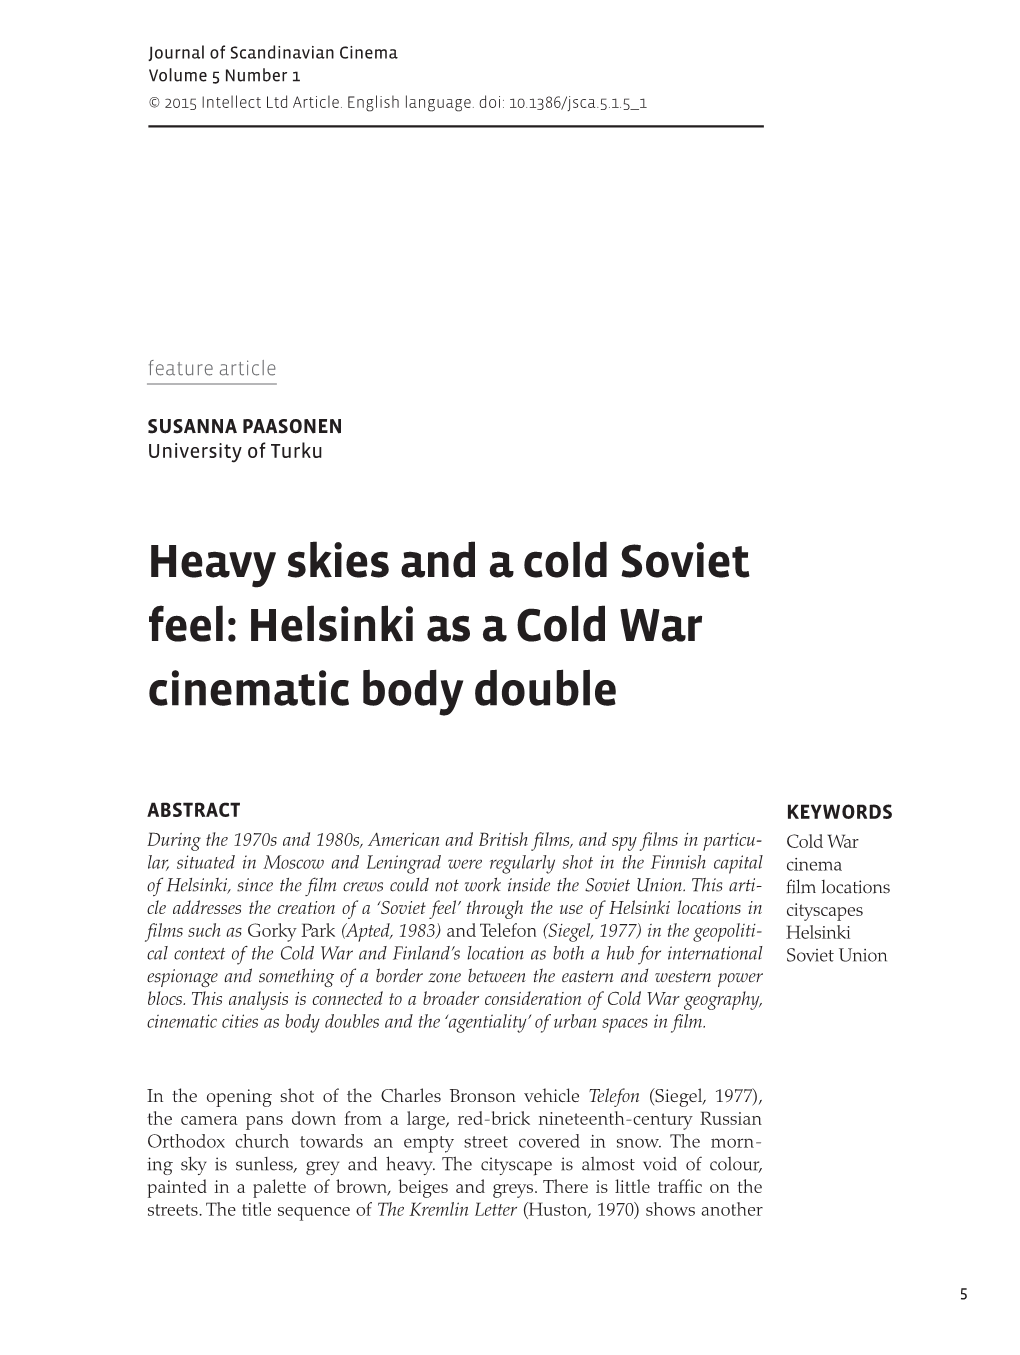 Heavy Skies and a Cold Soviet Feel: Helsinki As a Cold War Cinematic Body Double